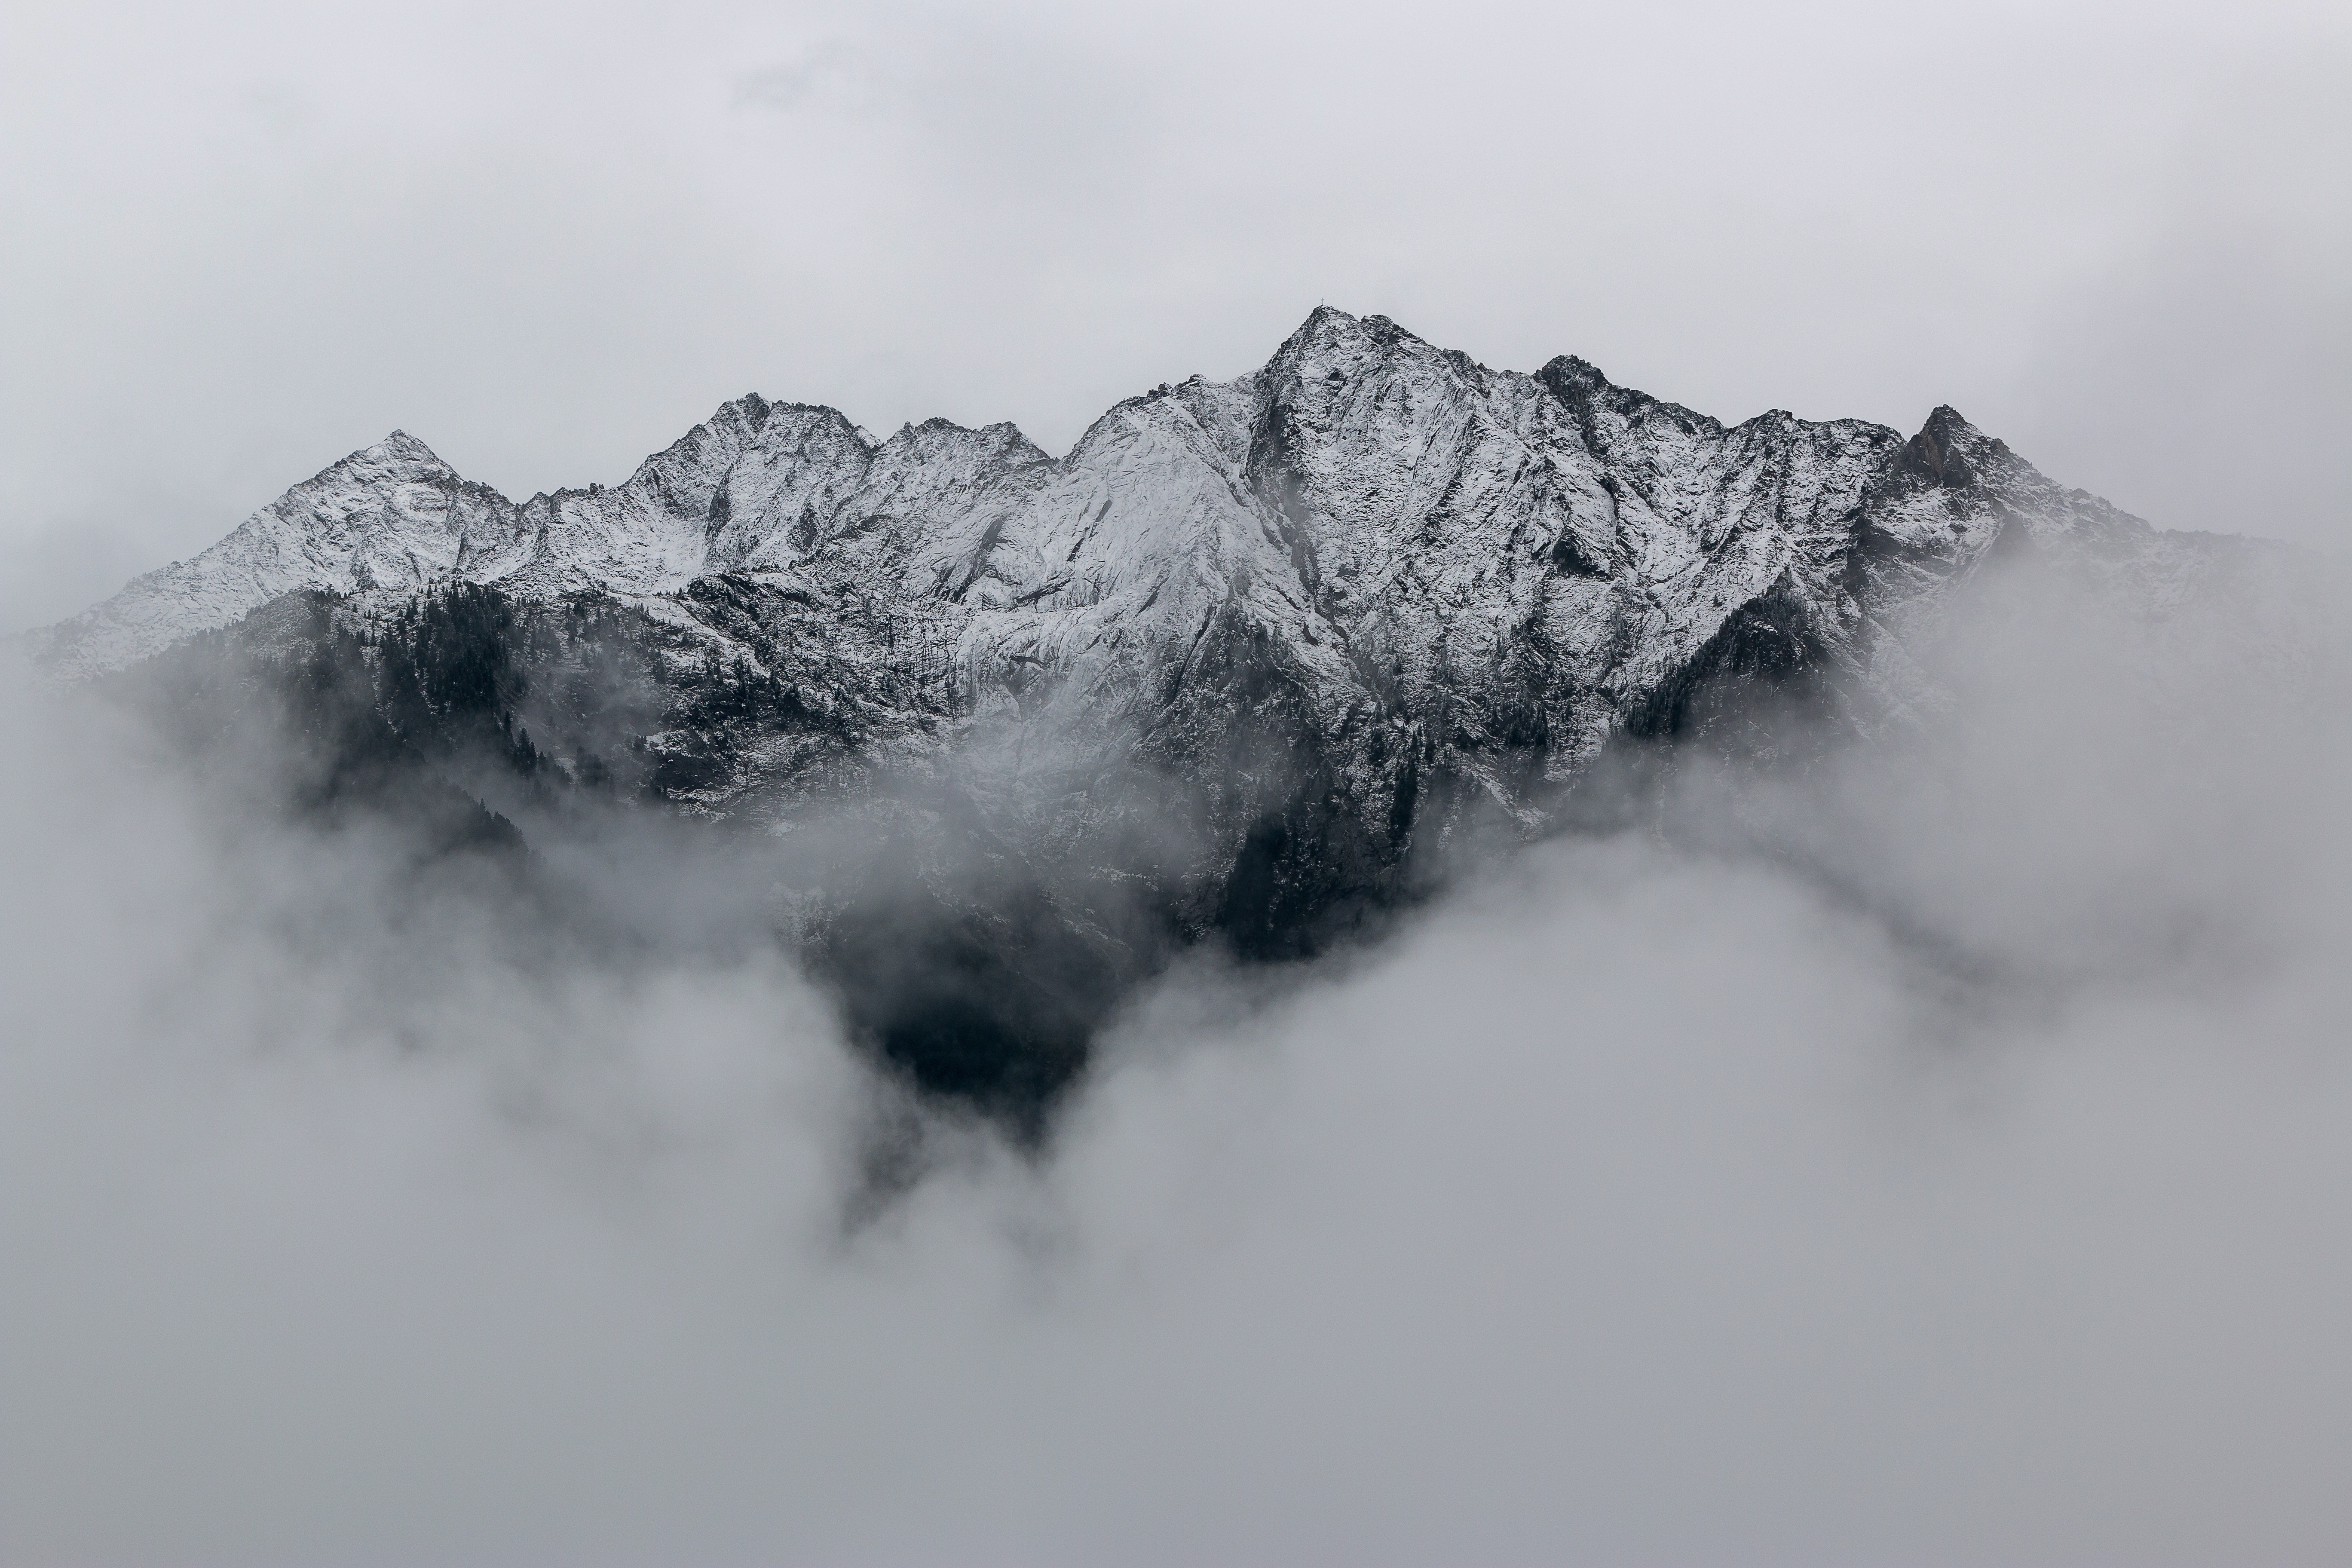 A jagged, rocky, mountainous skyline emerging from clouds with grey sky behind.